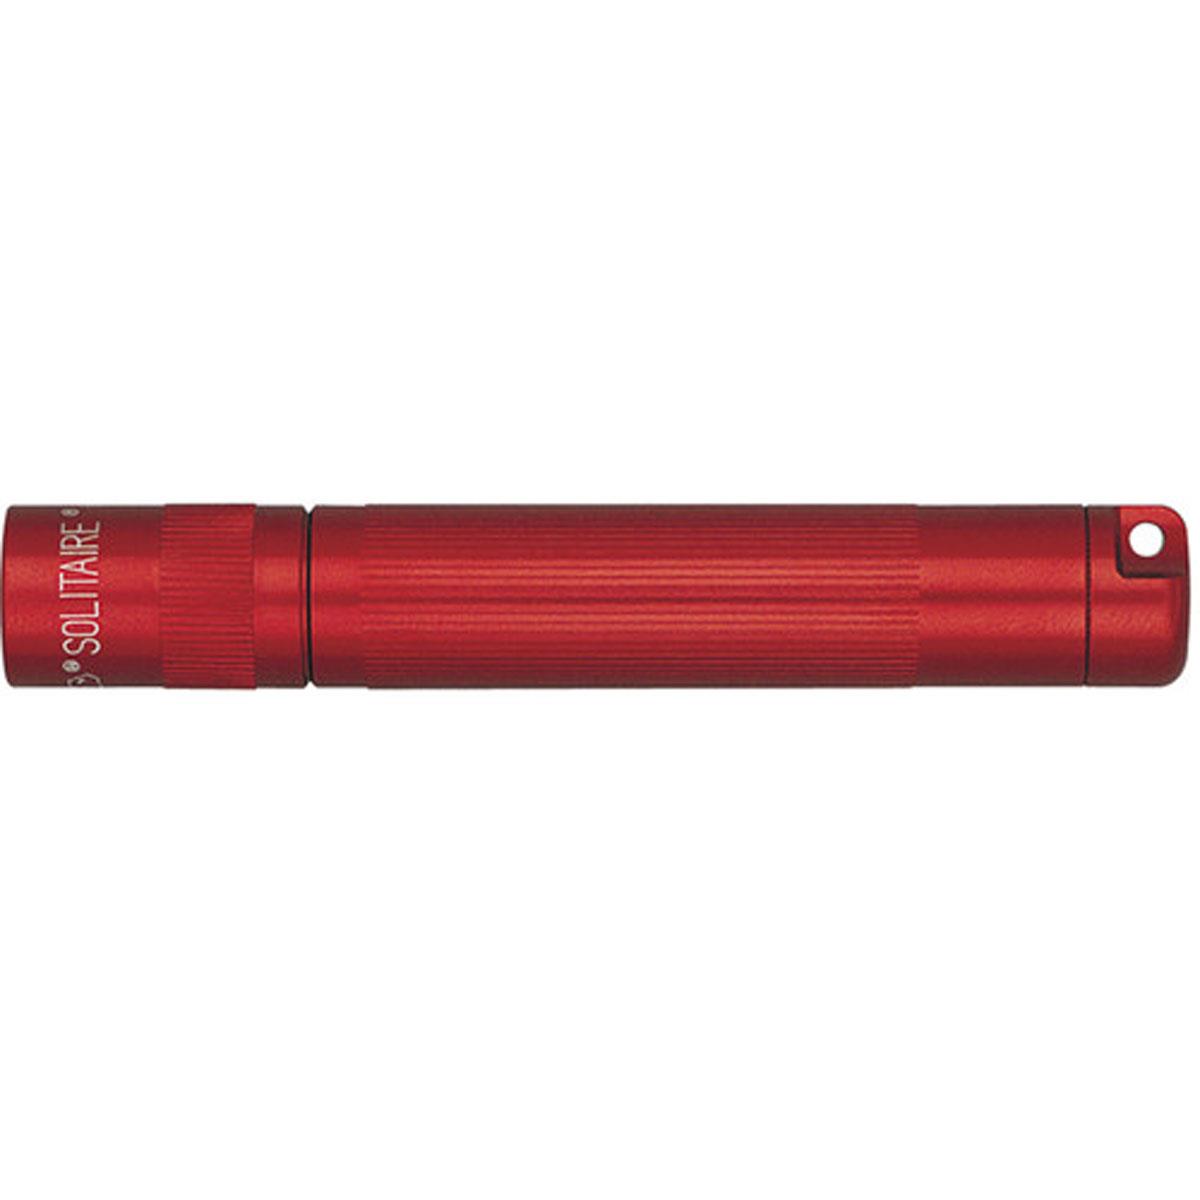 Image of MagLite Maglite K3A036 Solitaire 1-Cell AAA Flashlight with Battery